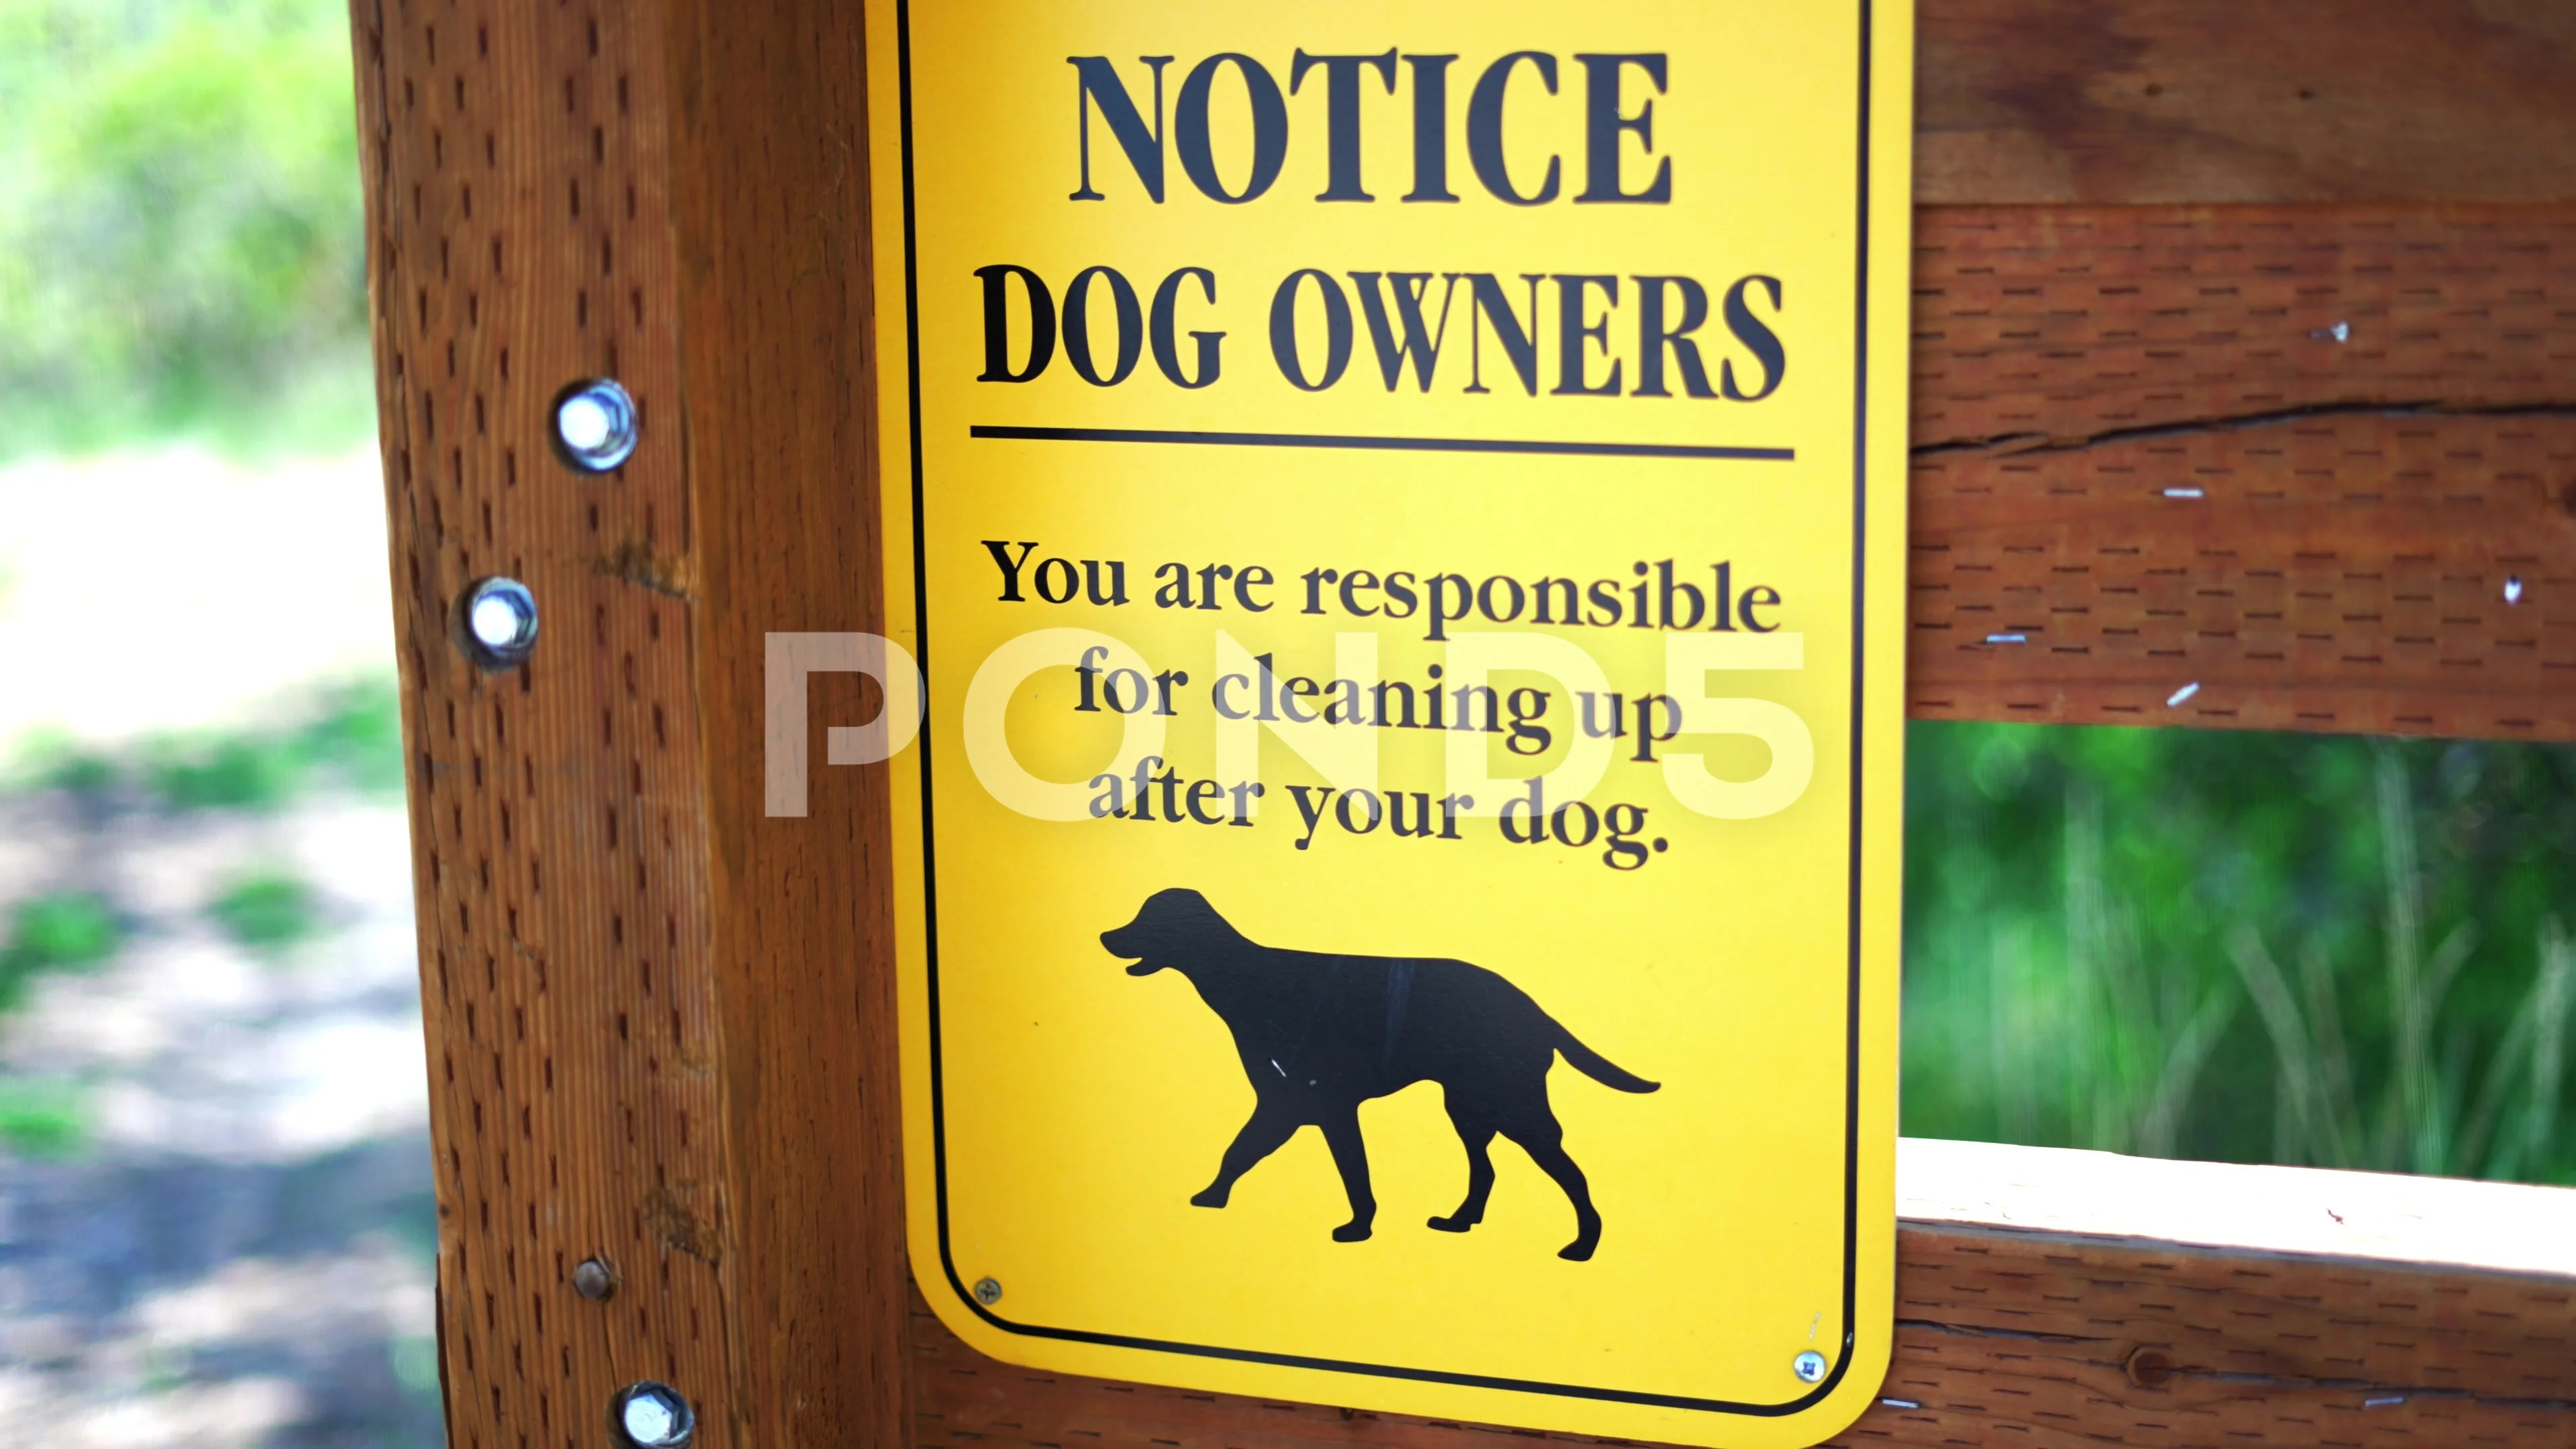 Can dog owners be evicted for not supplying dog poop samples?